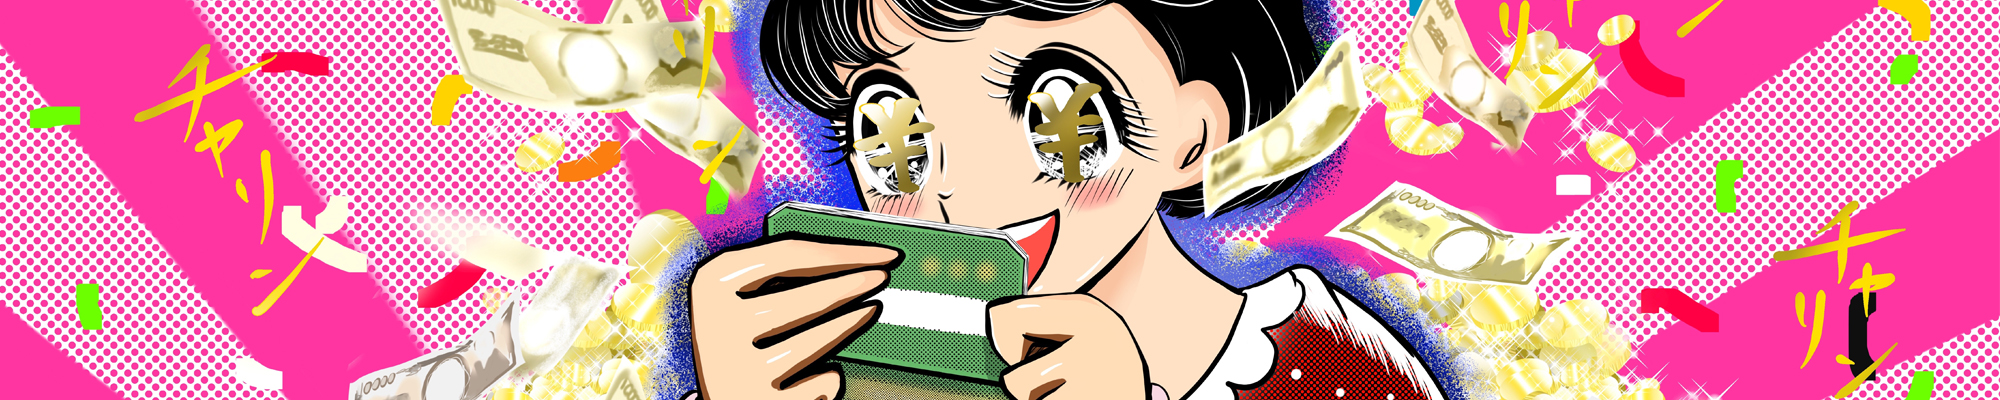 anime girl looking at phone surrounded by money